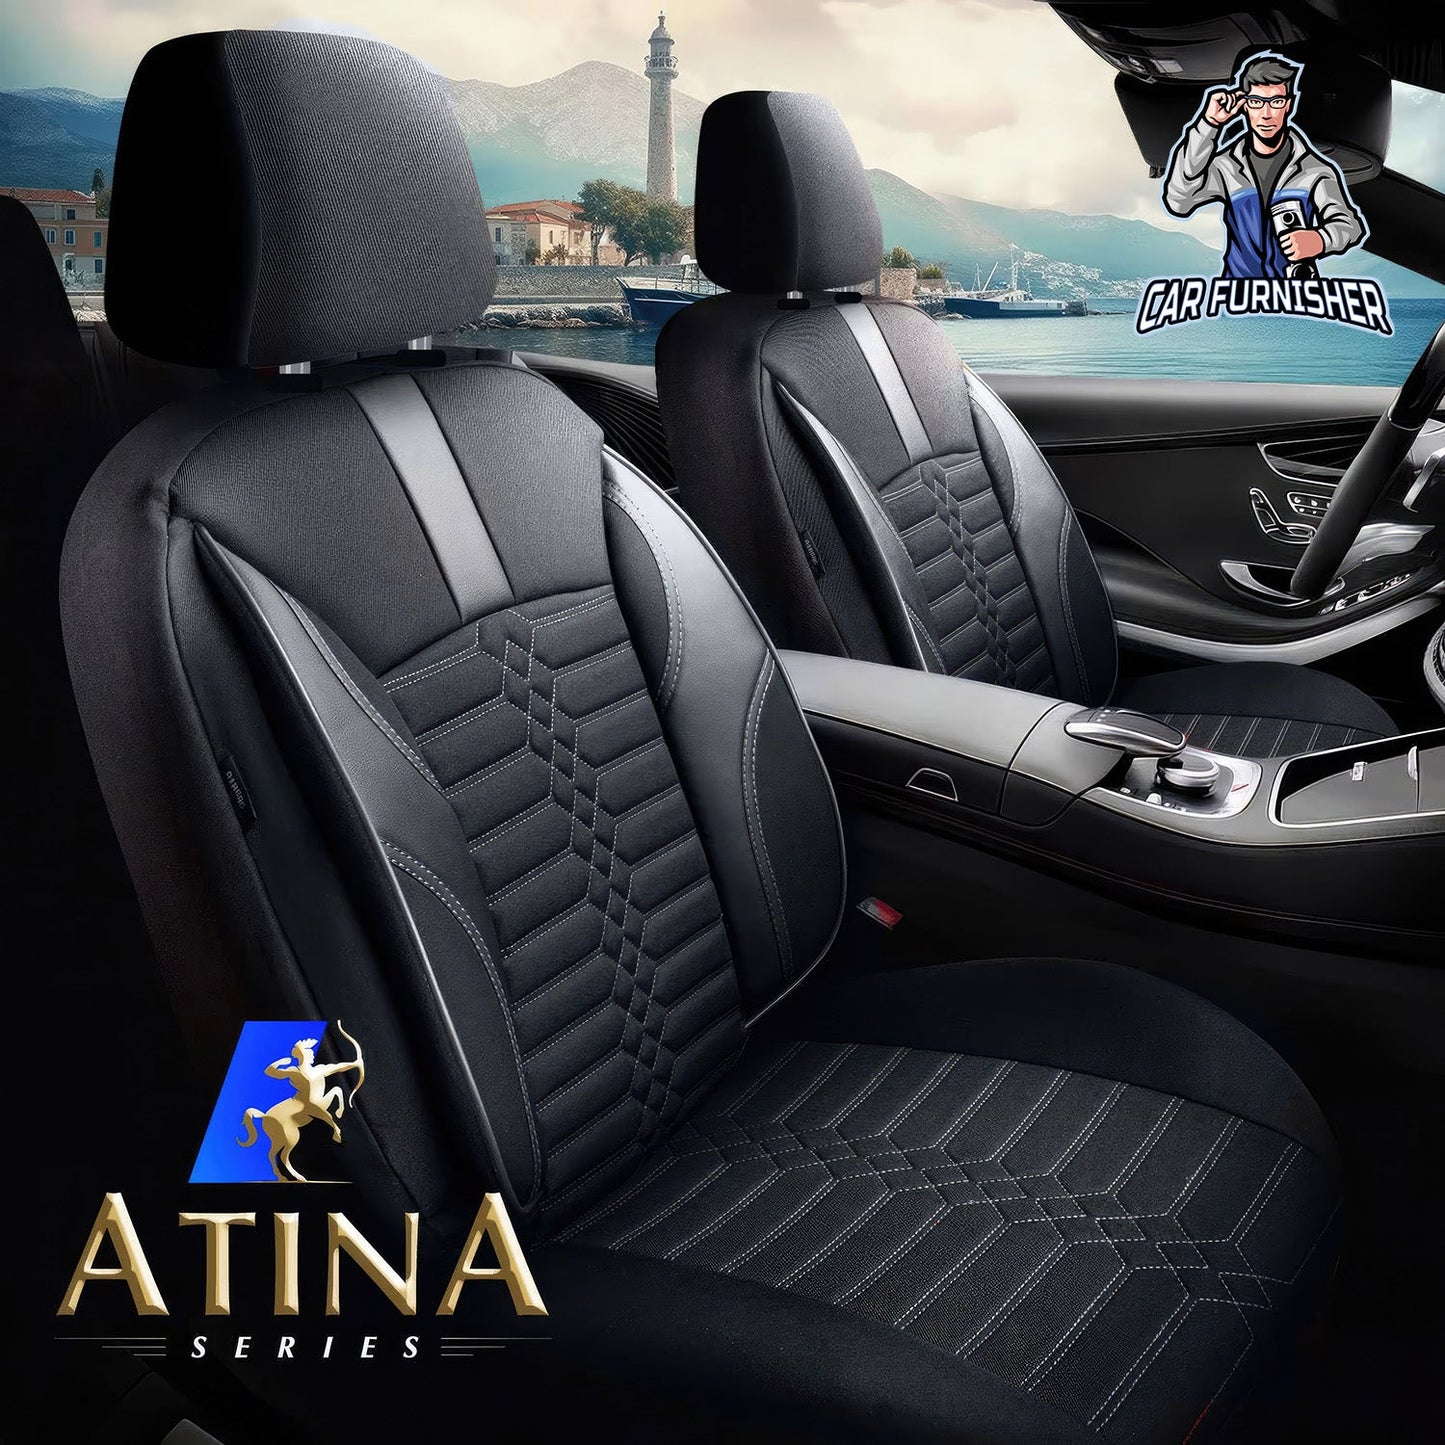 Volkswagen Jetta Seat Covers Athens Design Gray 5 Seats + Headrests (Full Set) Leather & Jacquard Fabric